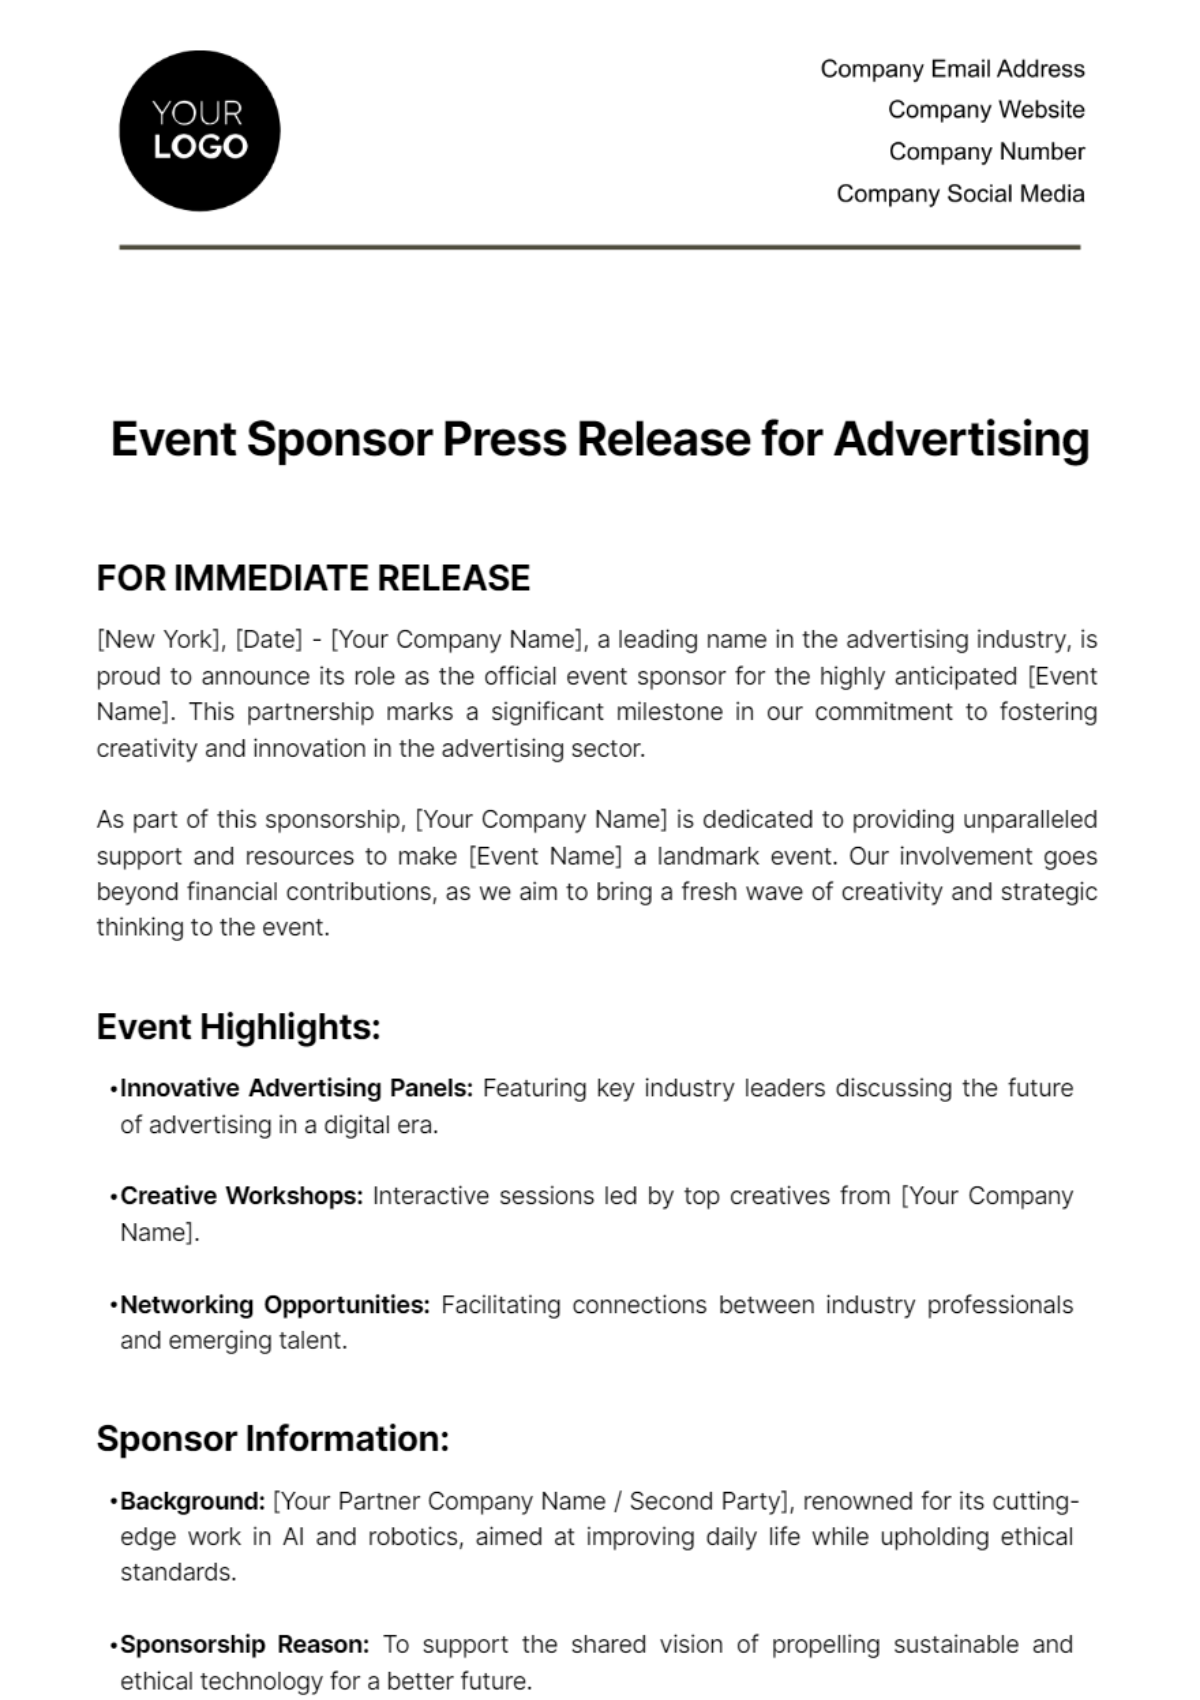 Event Sponsor Press Release for Advertising Template